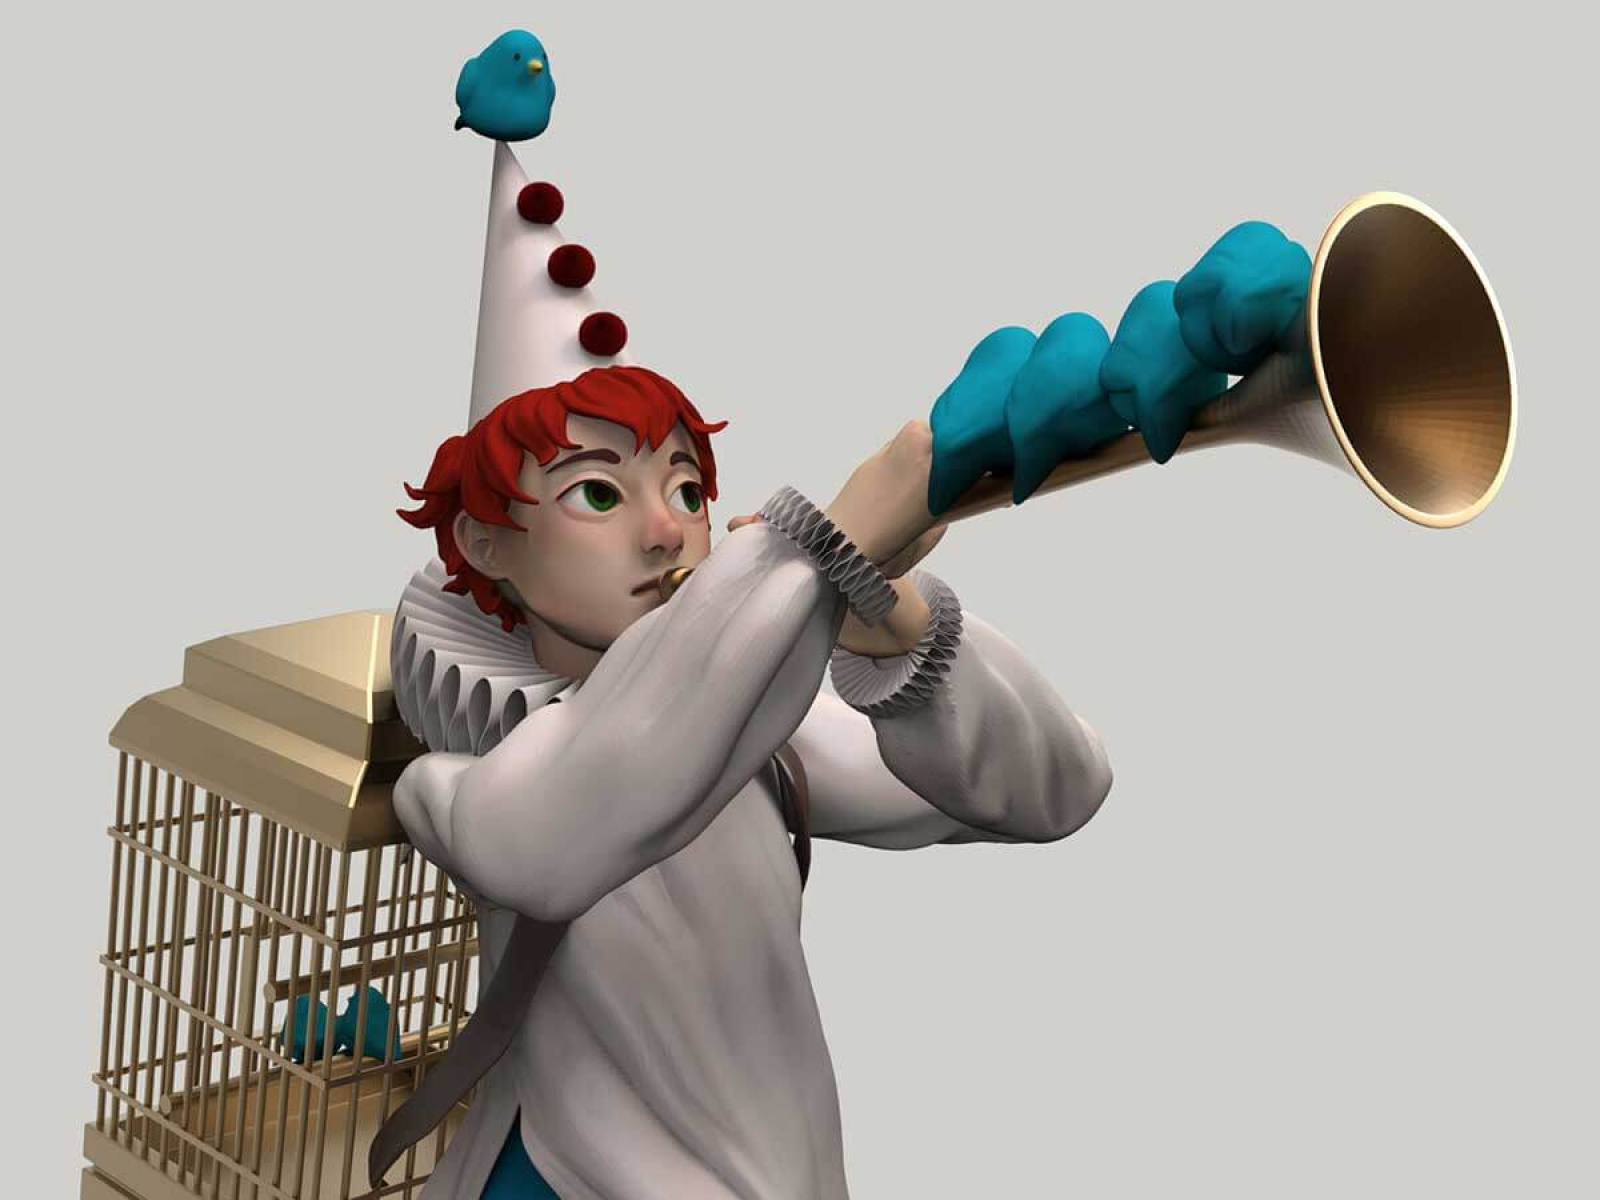 3D model of a jester playing a trumpet lined with blue birds.